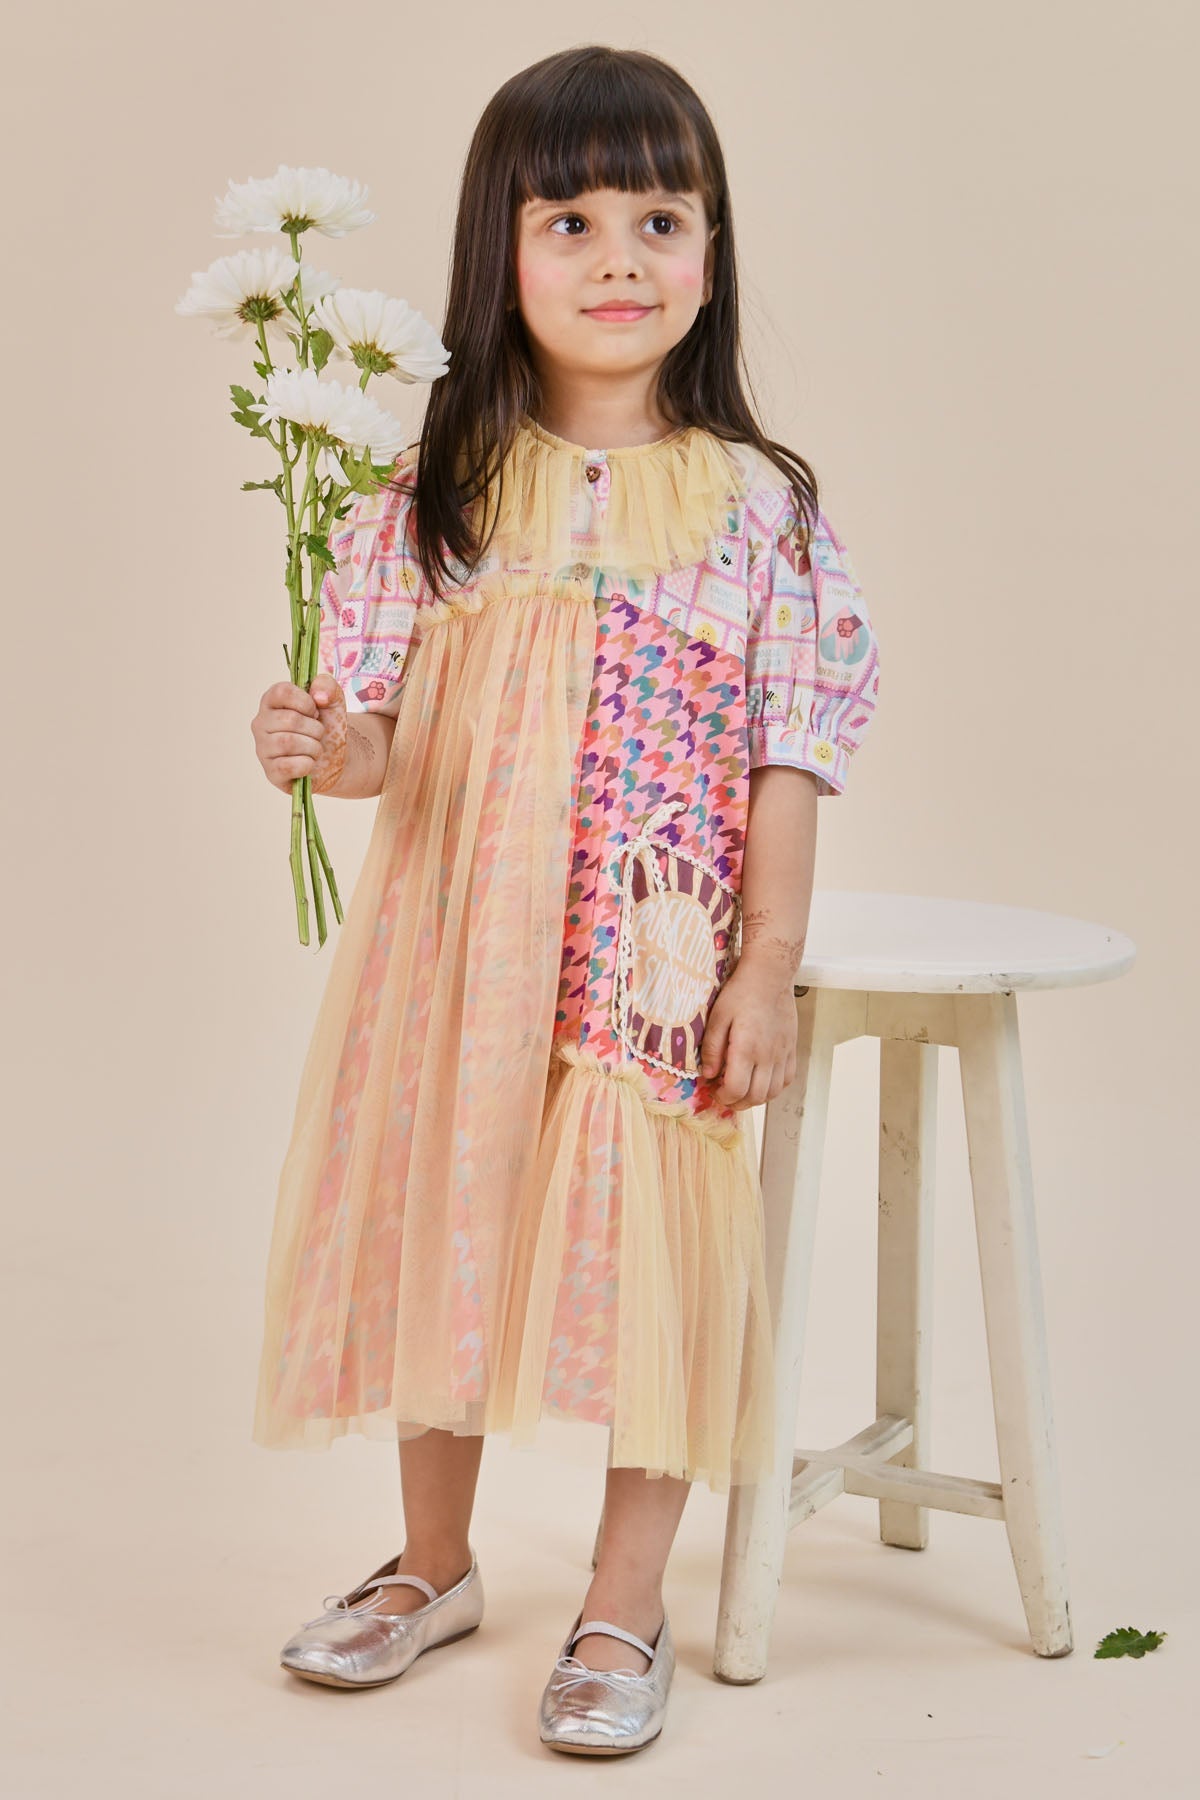 Designer Little Shiro Layered & Patch Printed Dress For Kids (Boys & Girls) Available online at ScrollnShops